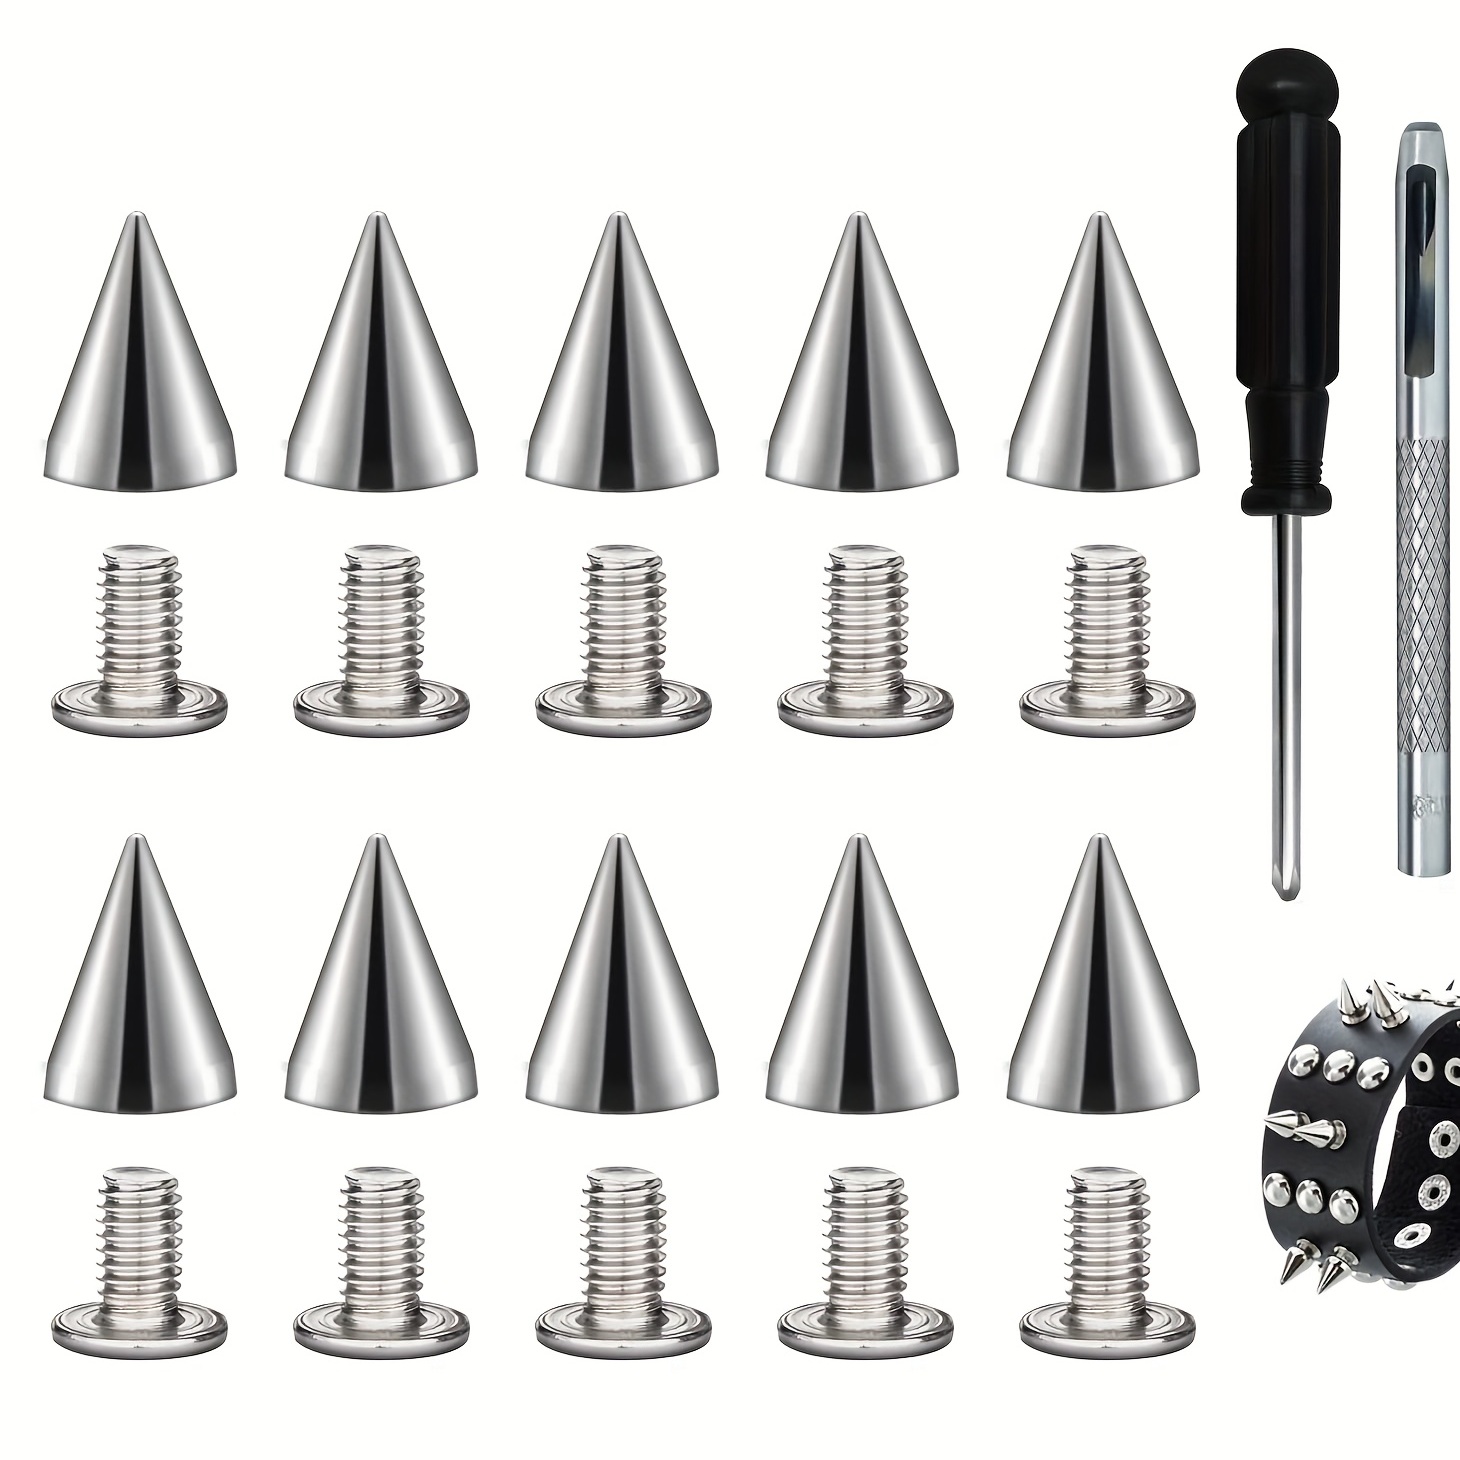 100/200Pcs DIY Punk Rock Silver Tone Cone Studs Spikes For Shoes Bags Decor